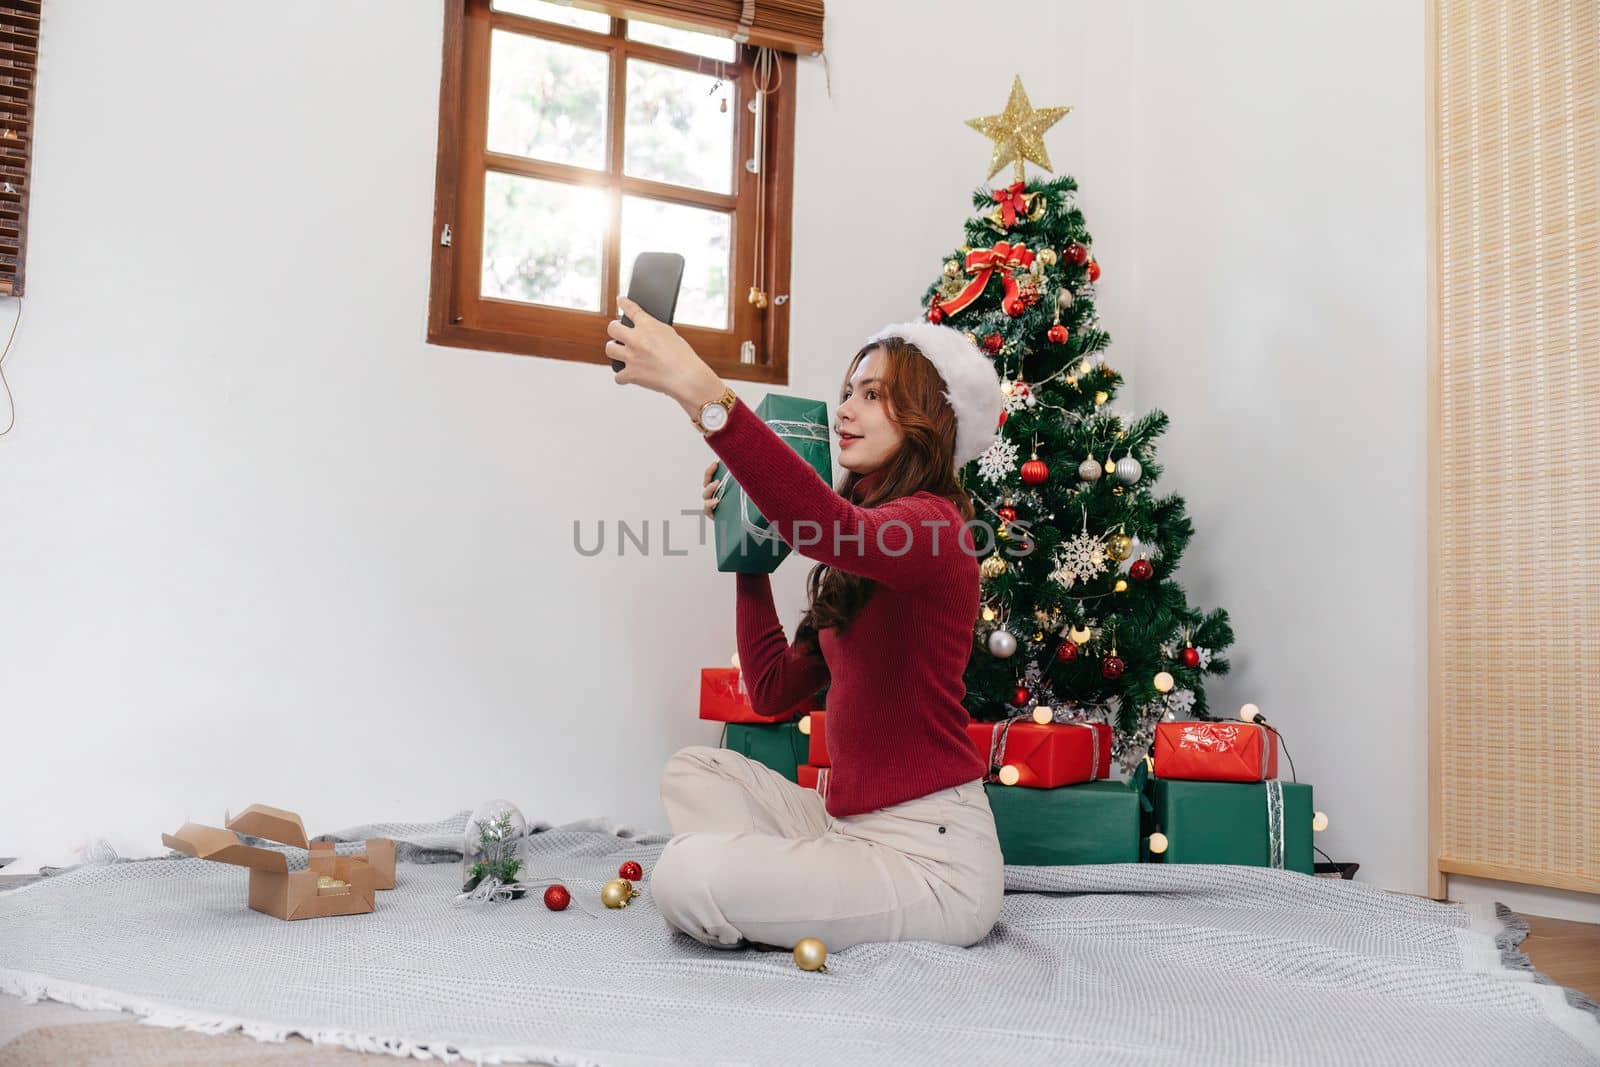 Holiday selfie at Christmas tree. Happy young girl taking selfie on smart phone at decorated Christmas tree iat home.